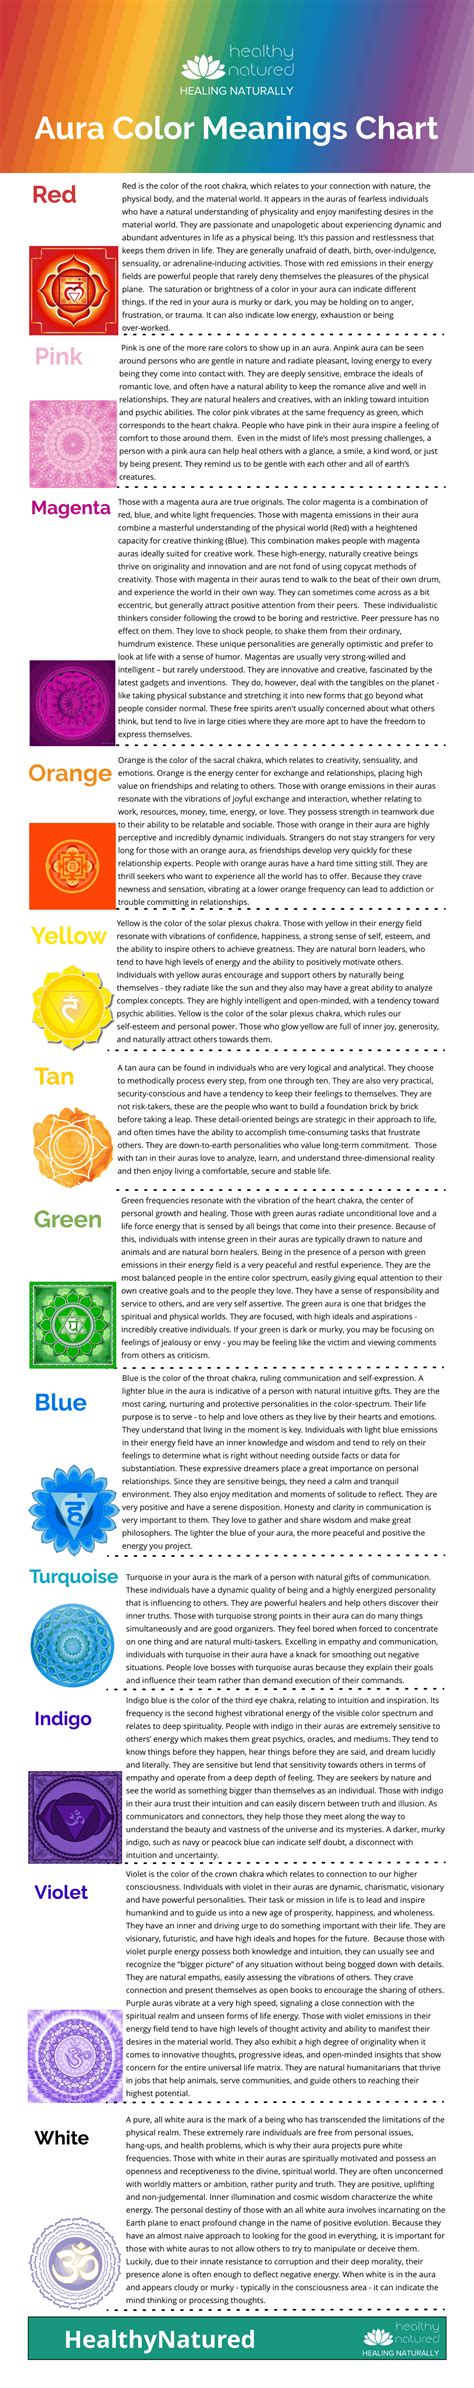 Aura Colors And Their Meanings The Chart With Both Aspects Included